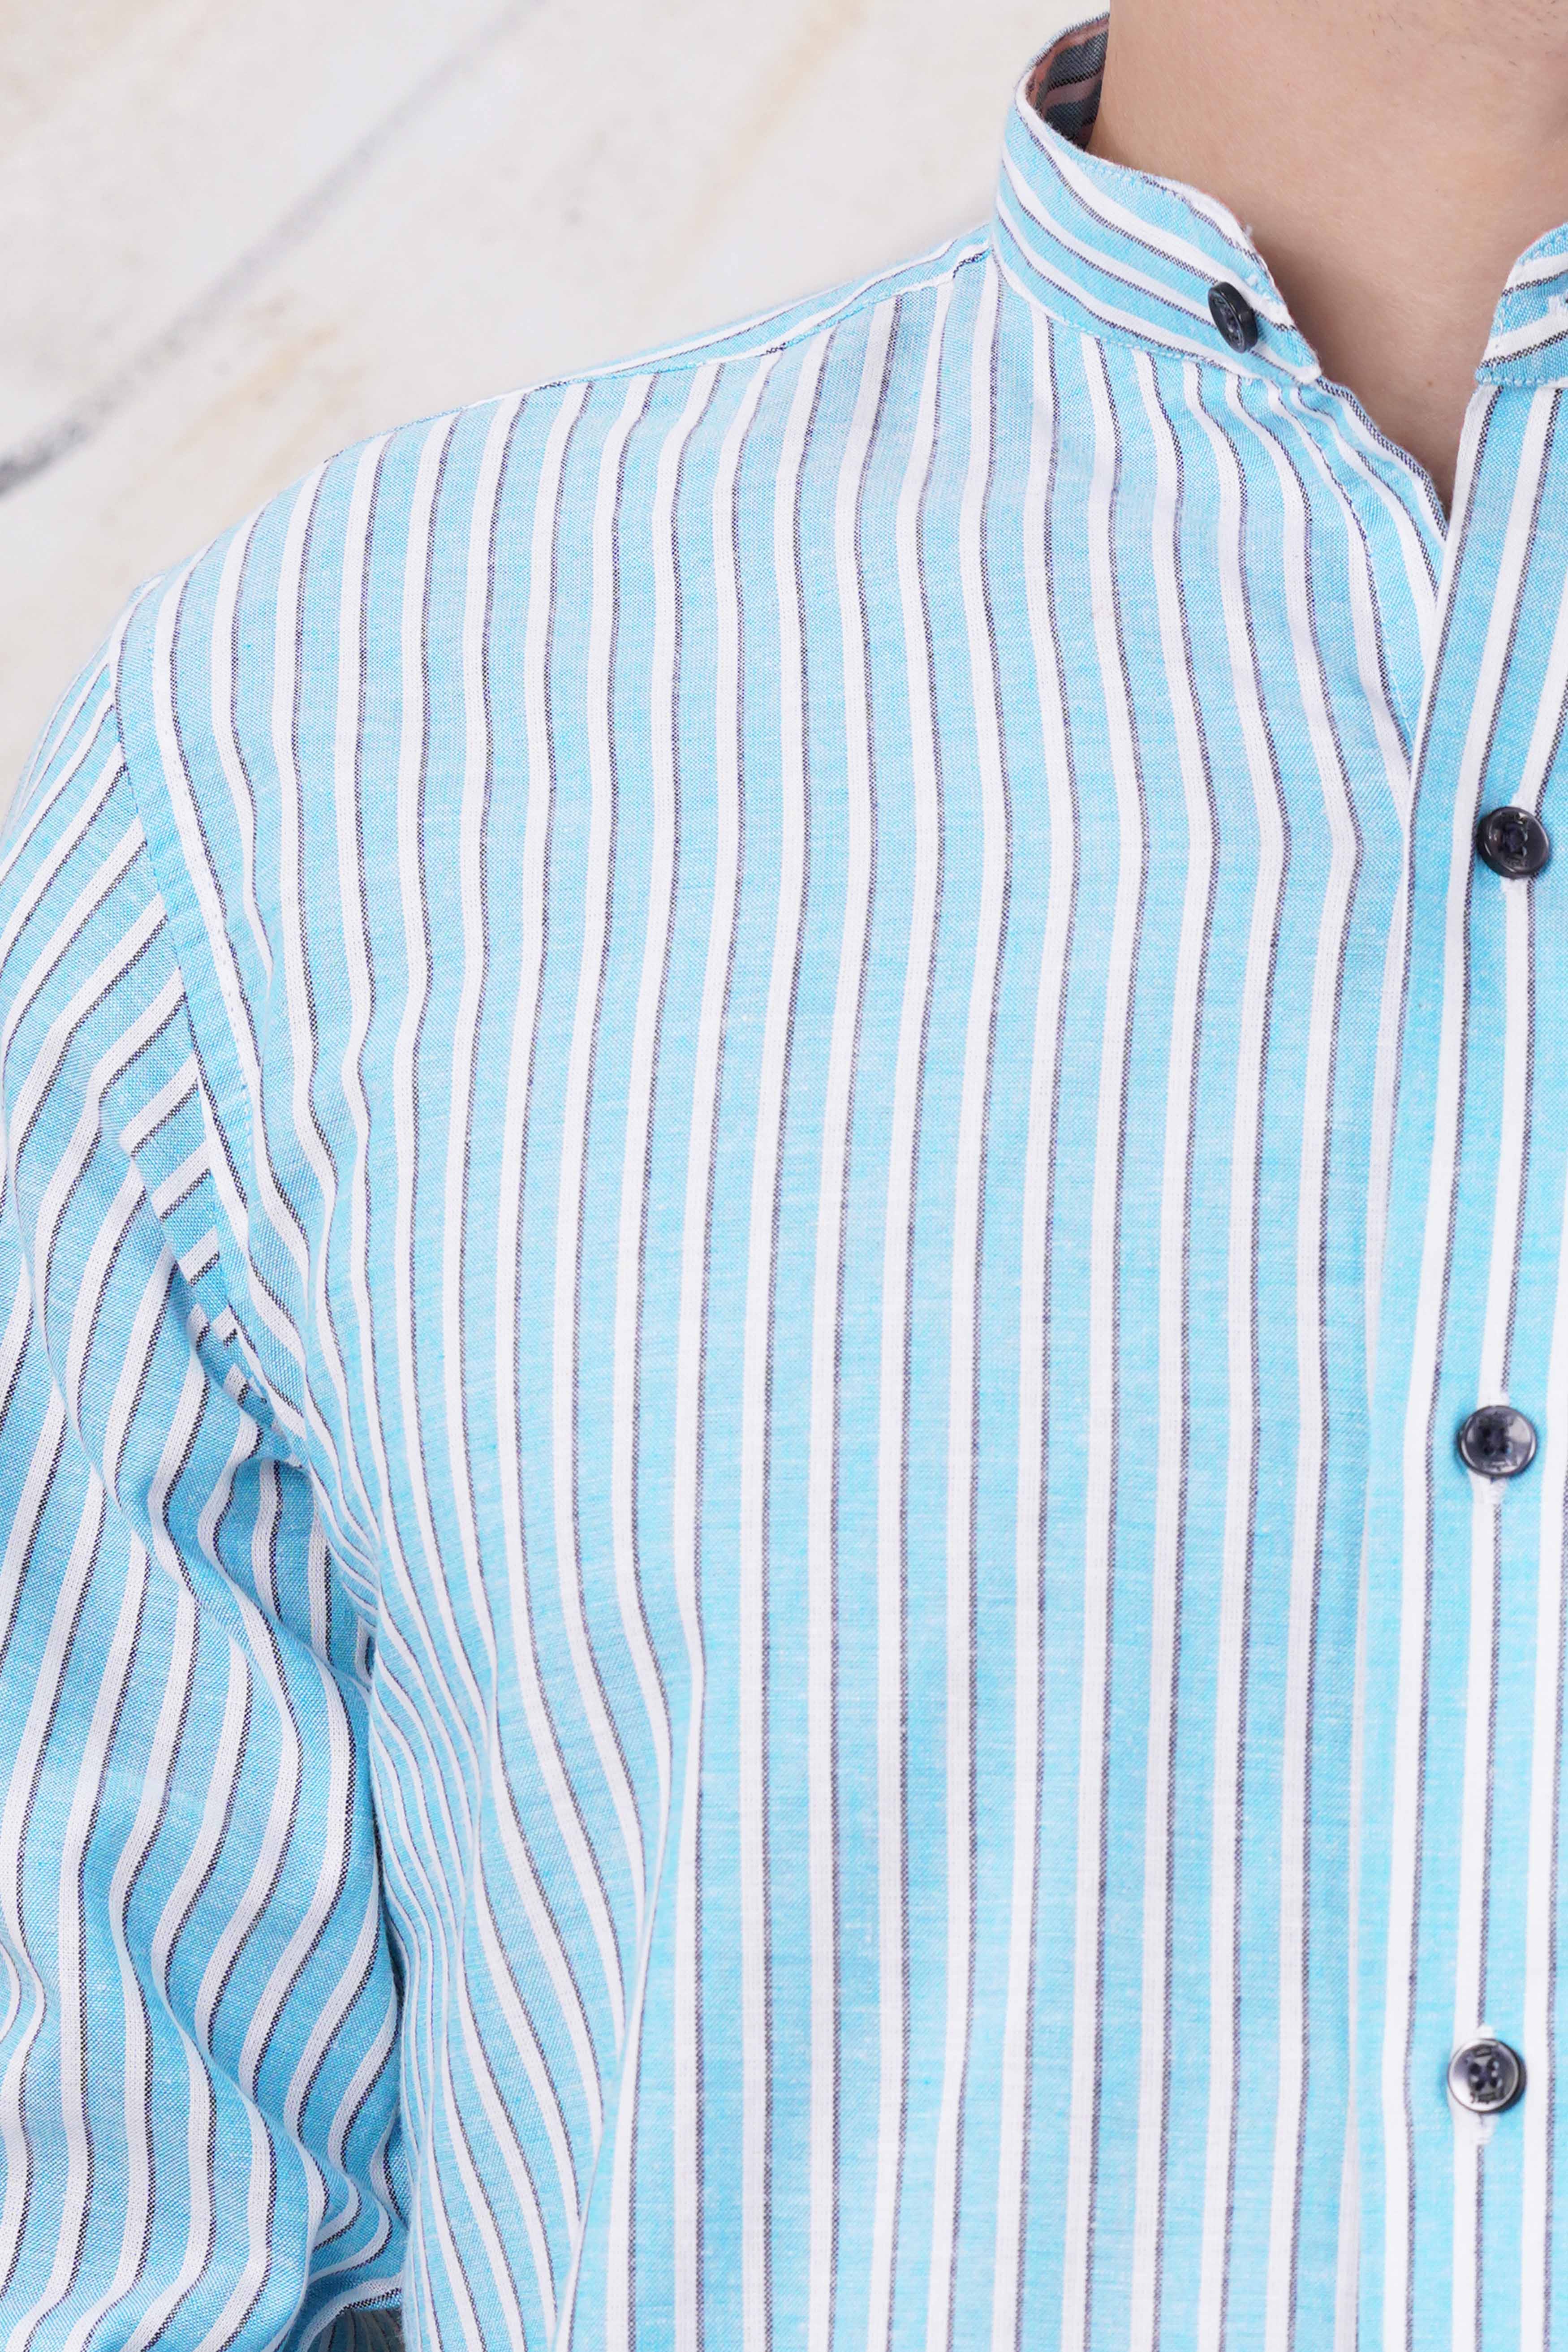 Blizzard Blue and White Striped Luxurious Linen Shirt